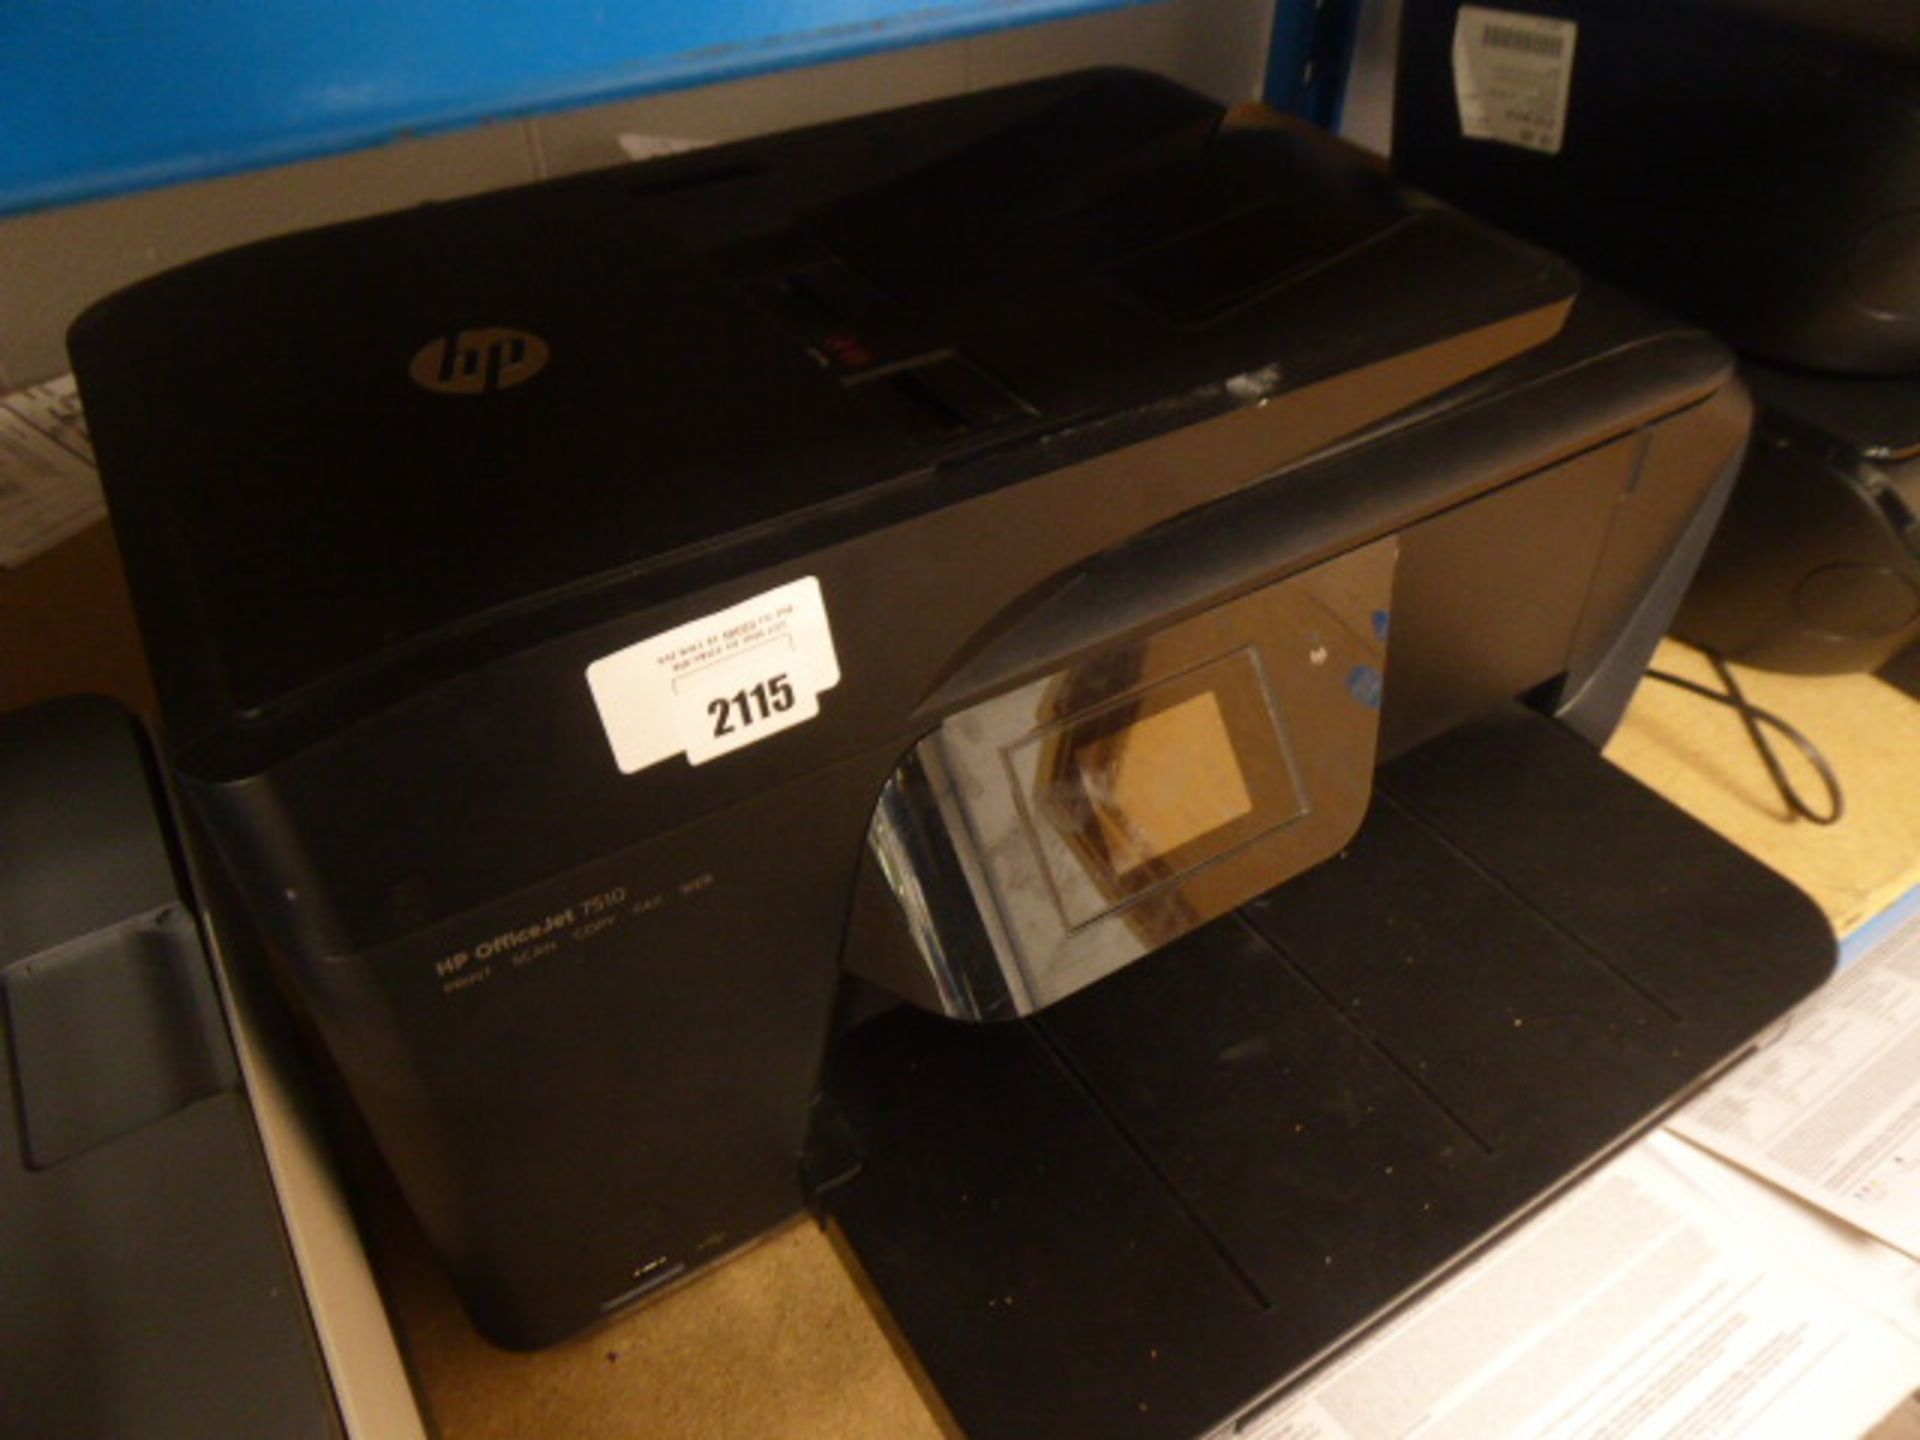 HP Officejet 7510 all in one printer - Image 2 of 2